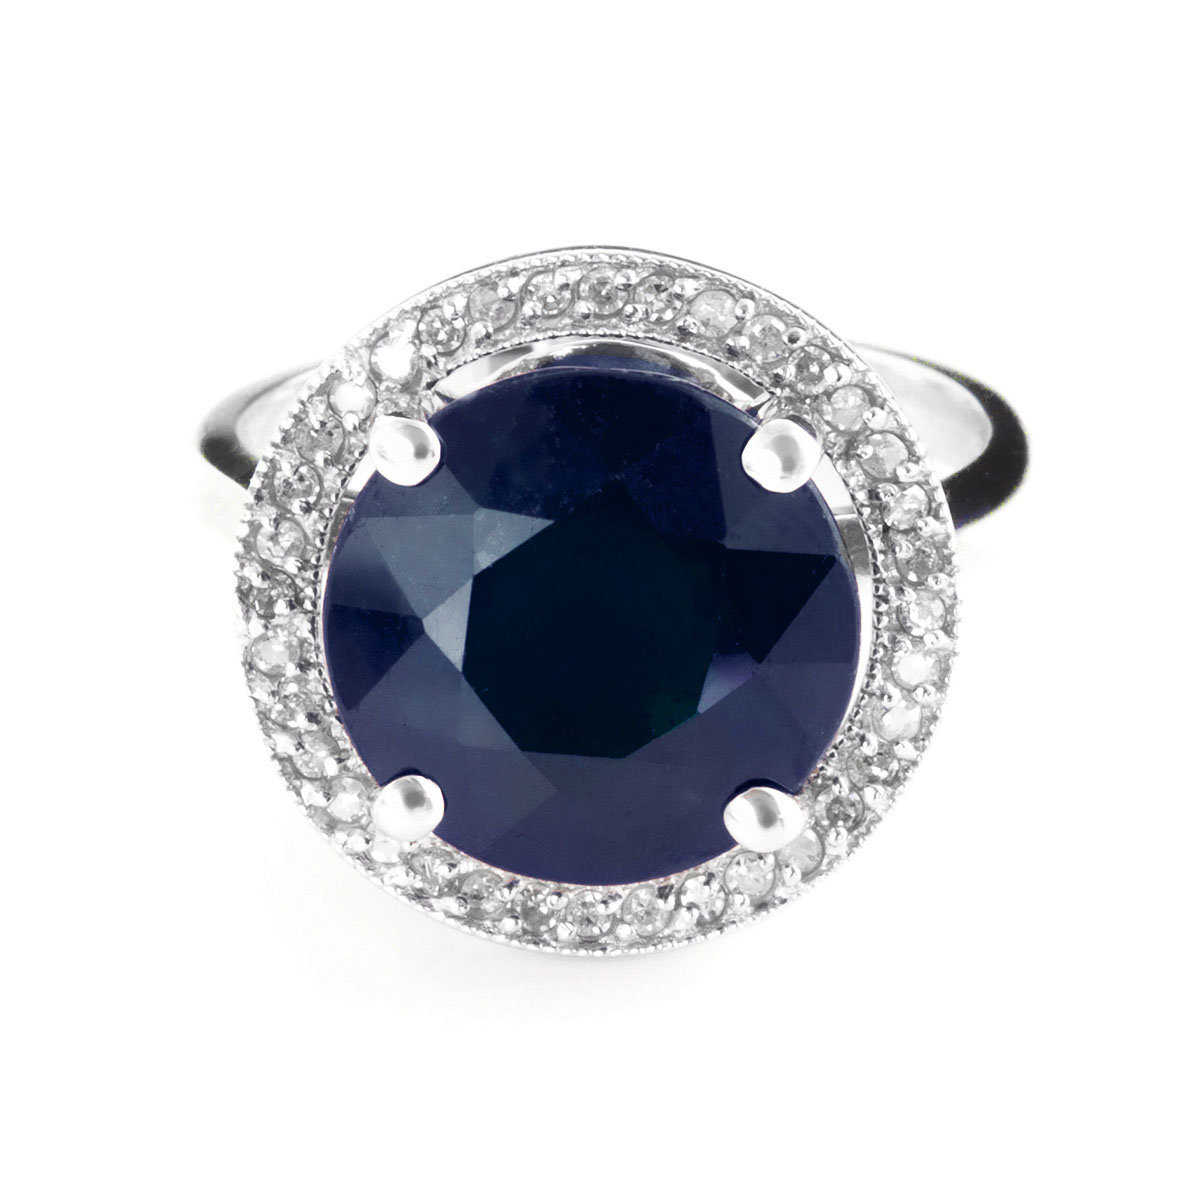 Sapphire & Diamond Halo Ring in 9ct White Gold